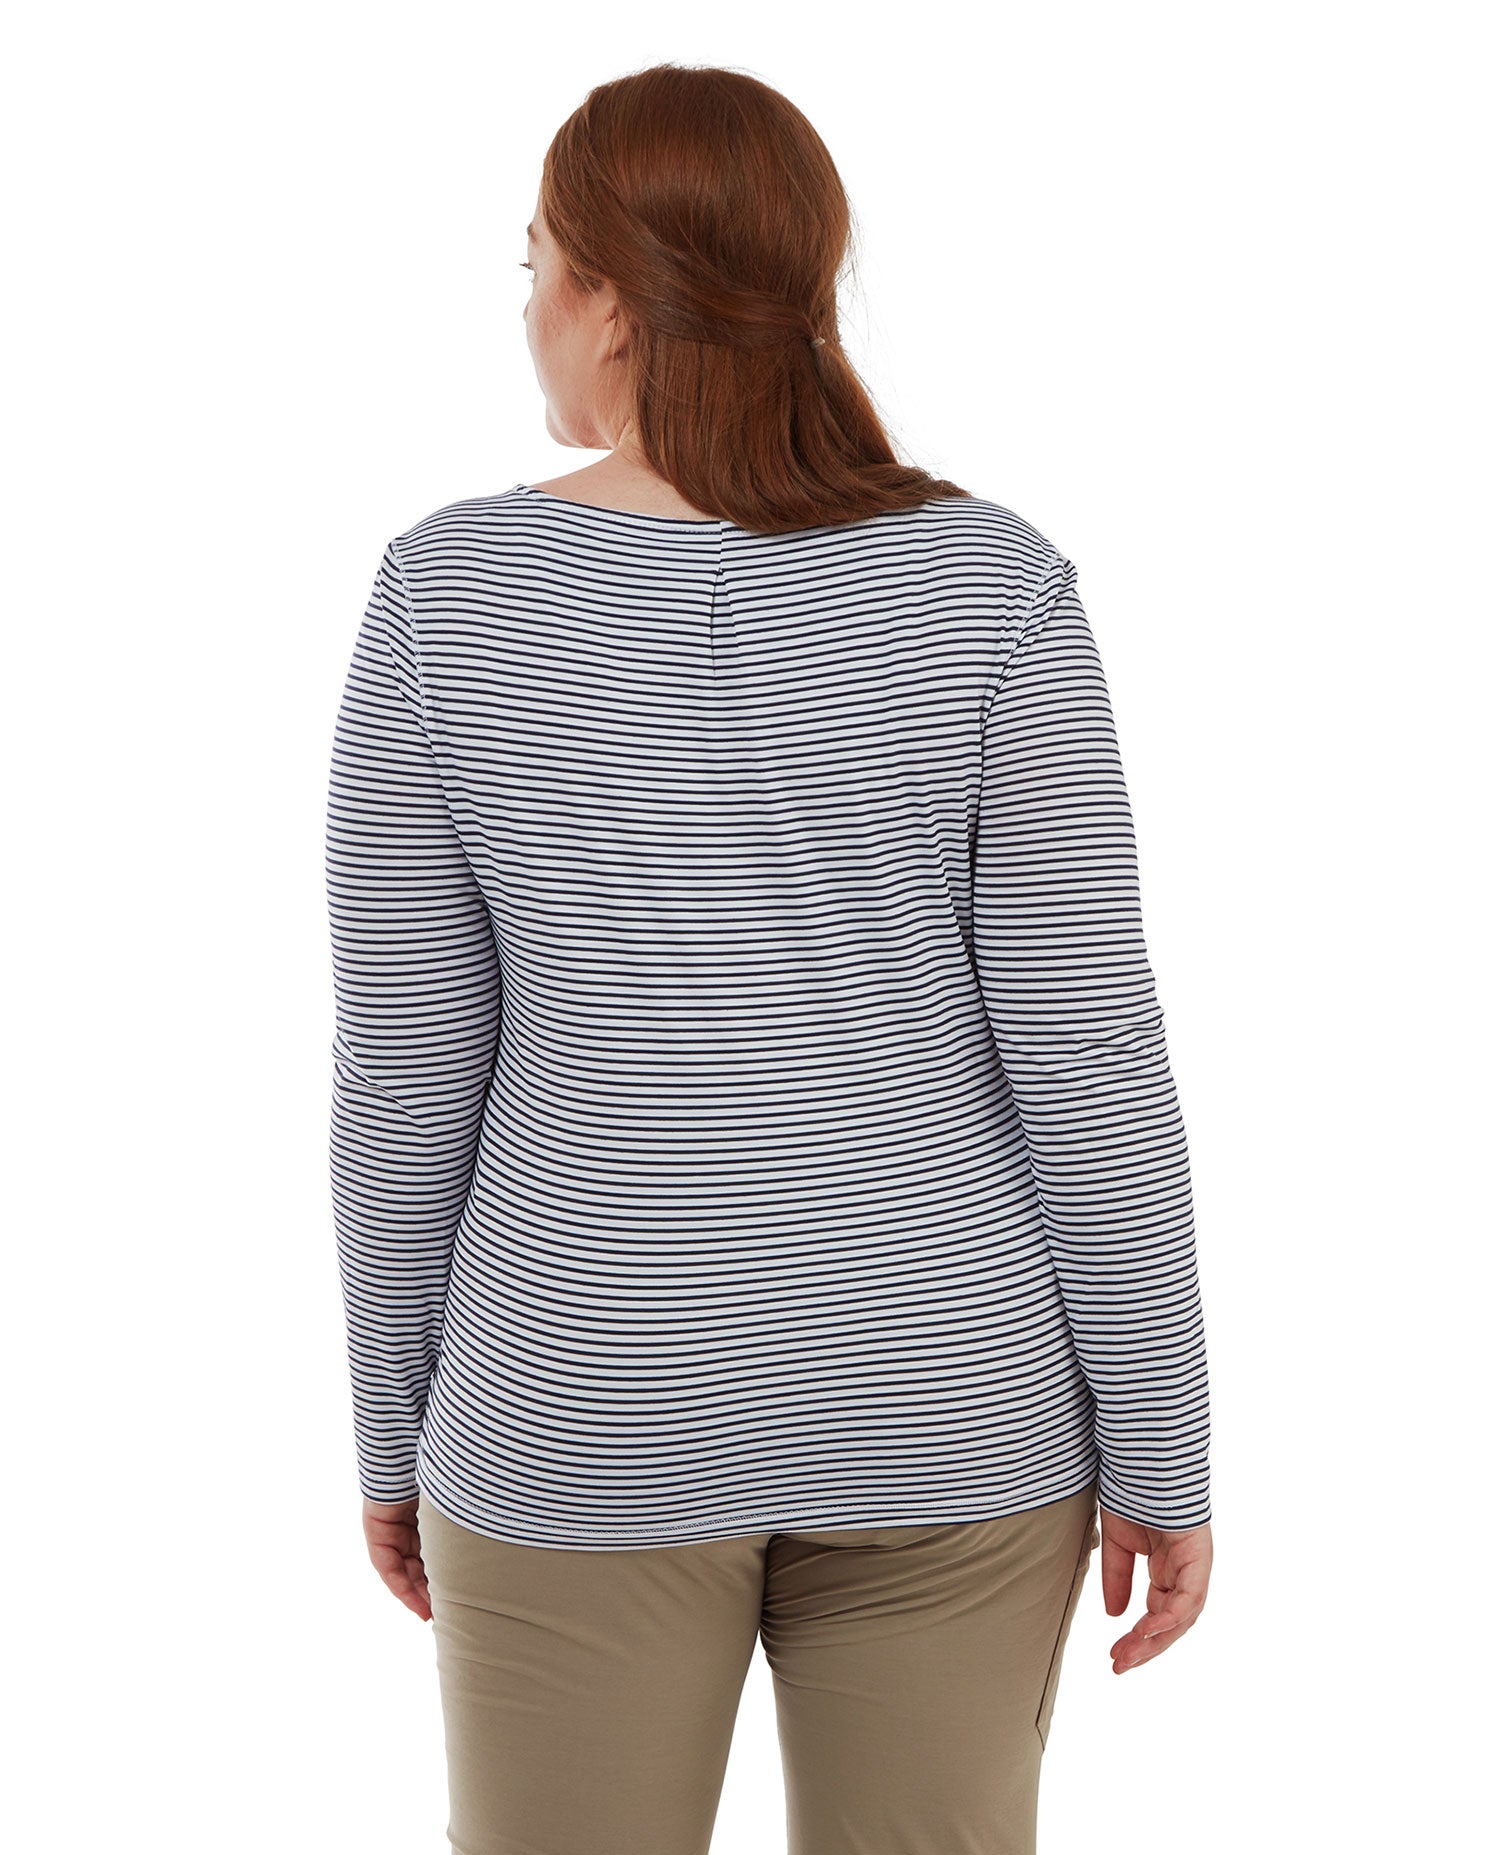 Large sizes Craghoppers NosiLife Erin Ladies L/S Top | Blue Navy Stripe